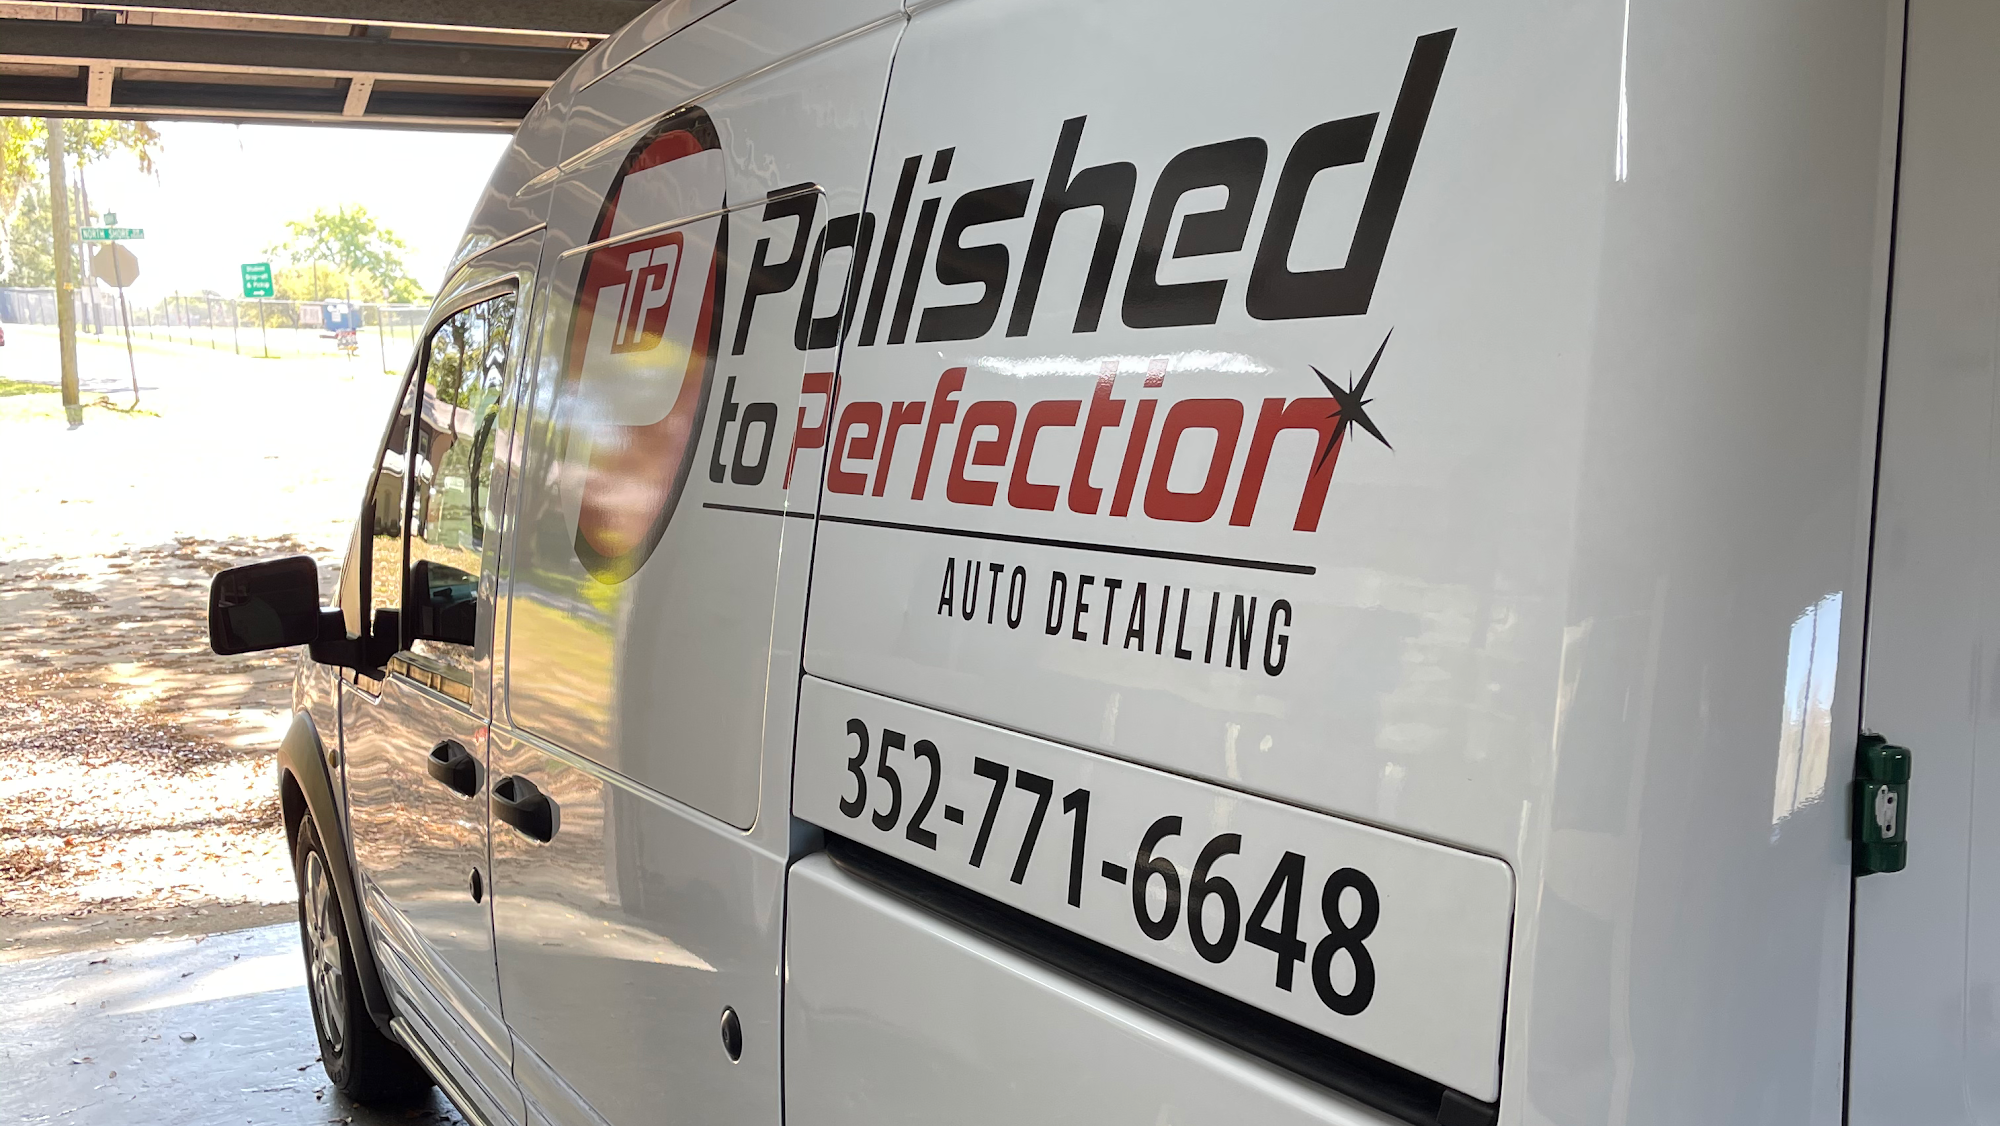 Polished to Perfection Auto Detailing and Ceramic Coatings